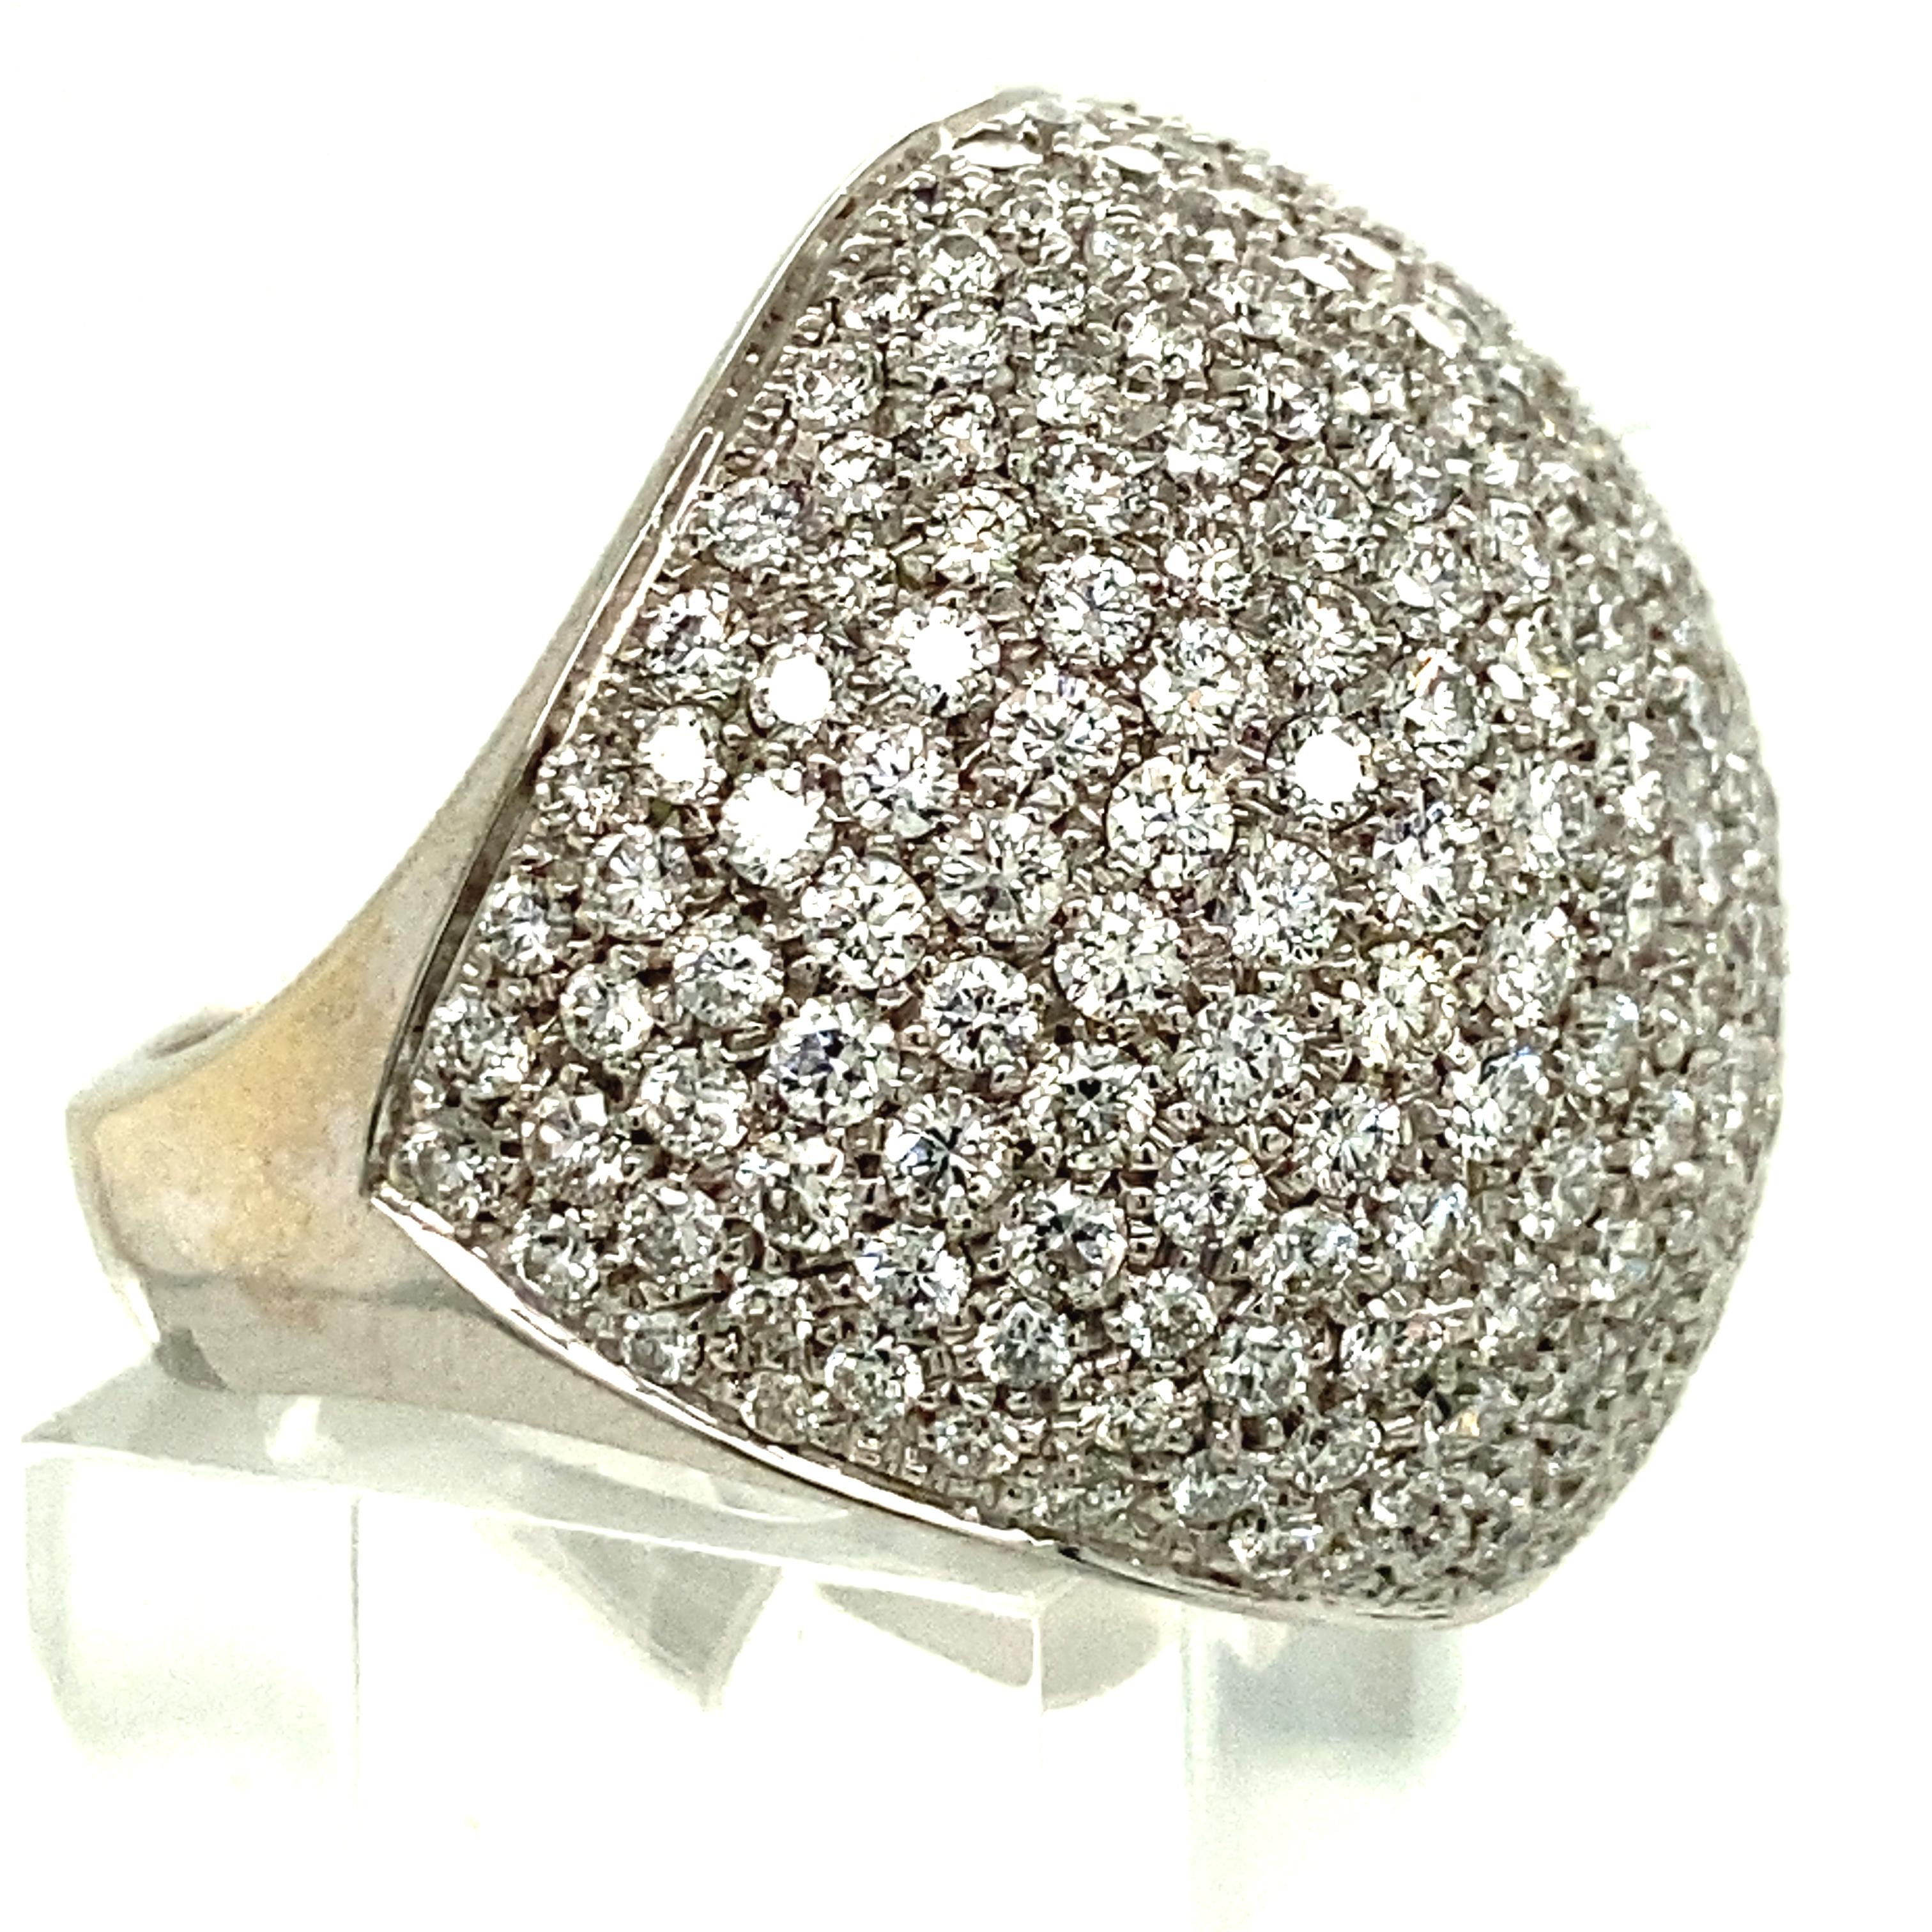 This sparkly 18k White gold dome ring from Krieger makes a beautiful addition to your Holiday wish list, with just over 4.6k of Diamonds this dome ring has the sparkle and dazzle to add that playful pop of Diamonds to your ensemble.